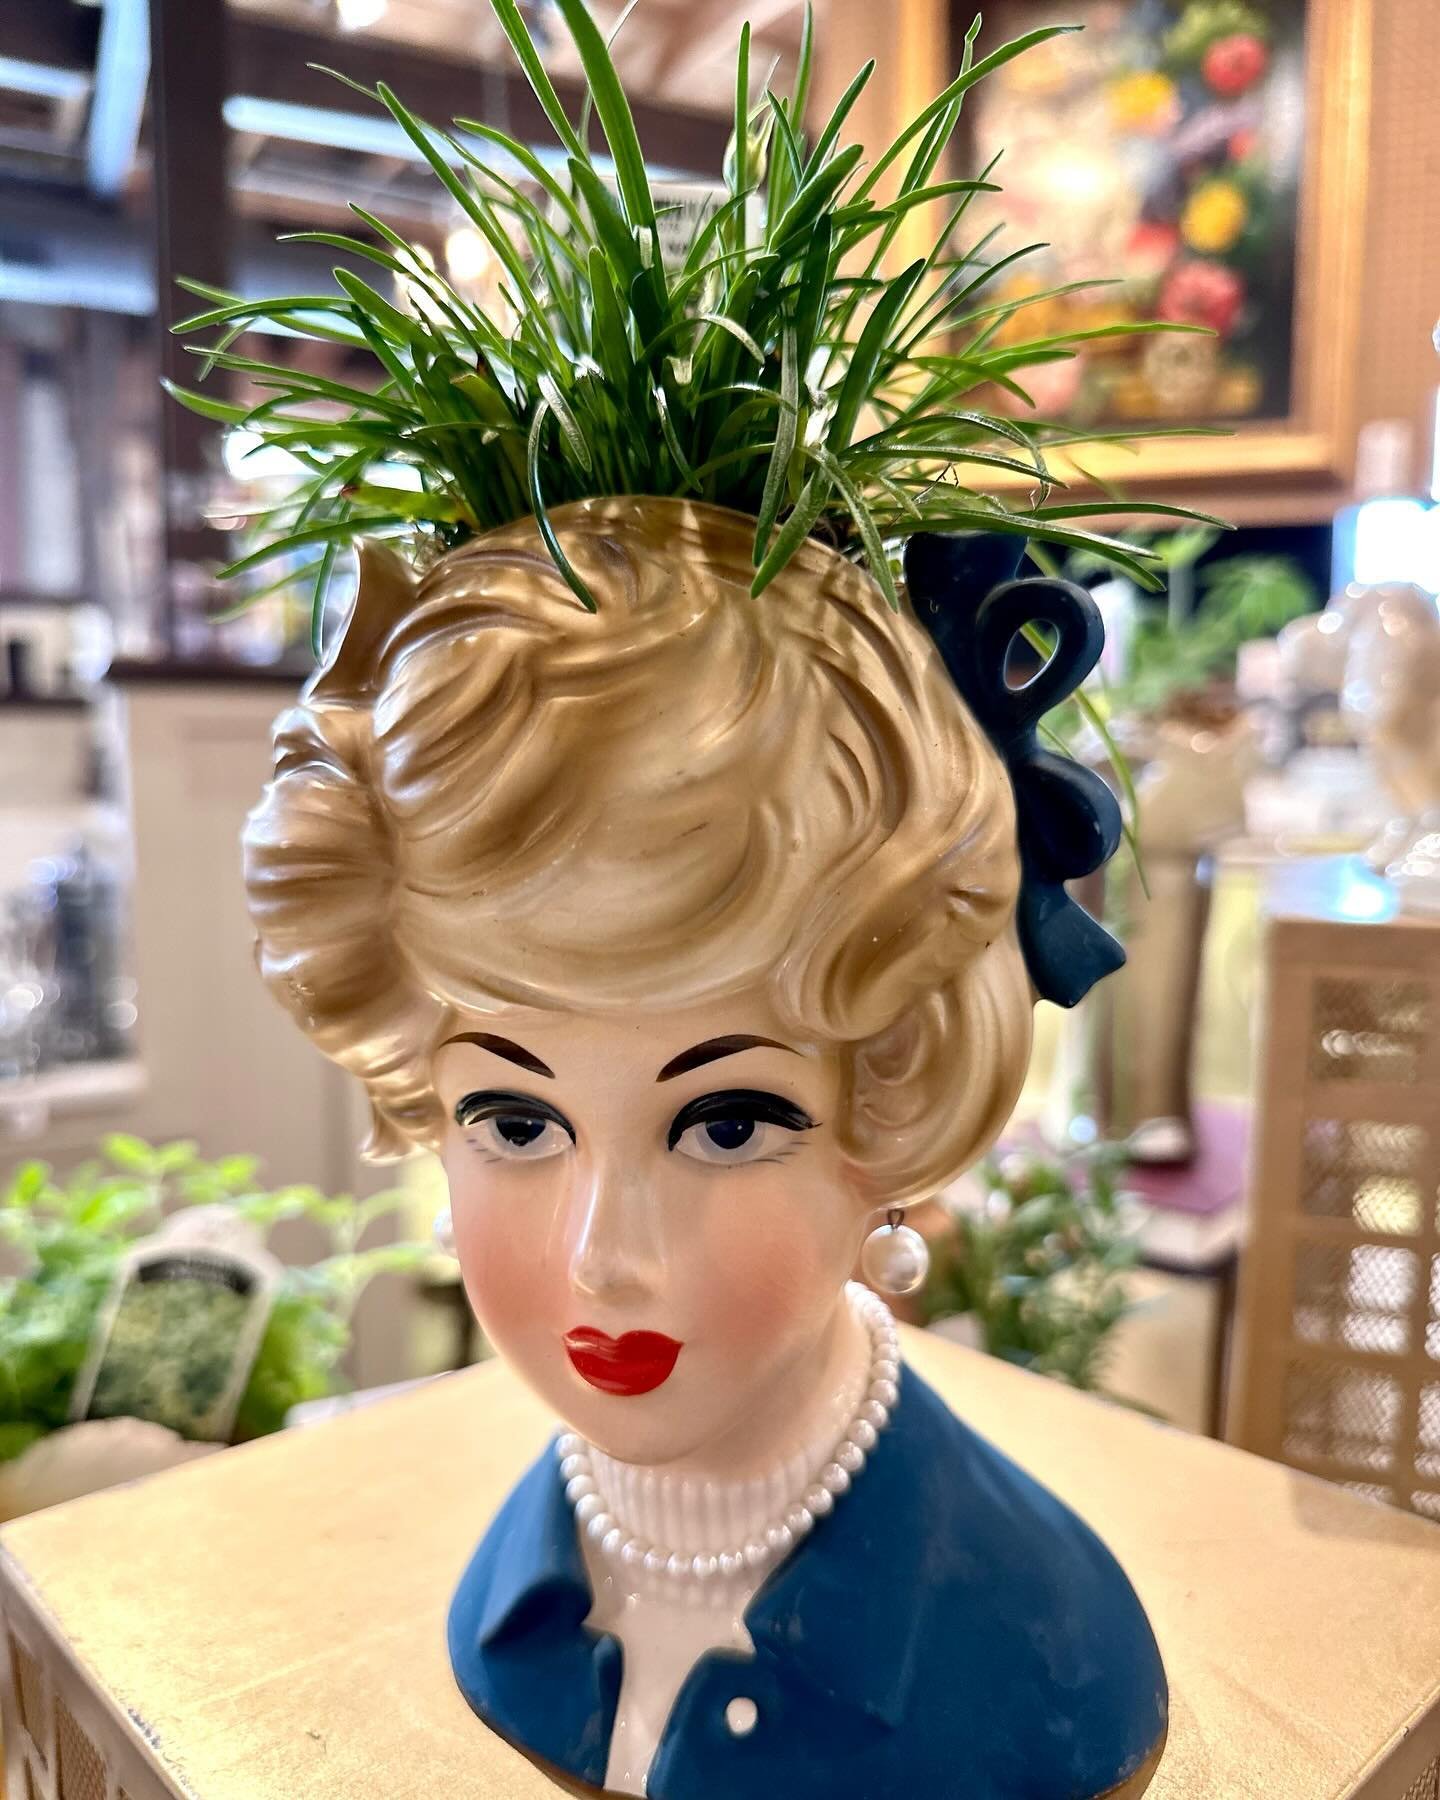 Bring a touch of timeless charm to Mother&rsquo;s Day with a vintage planter from Metamora General! 🌱💐 These one-of-a-kind planters, filled with real plants and herbs, are a lovely way to show Mom she&rsquo;s cherished (and more thoughtful and long